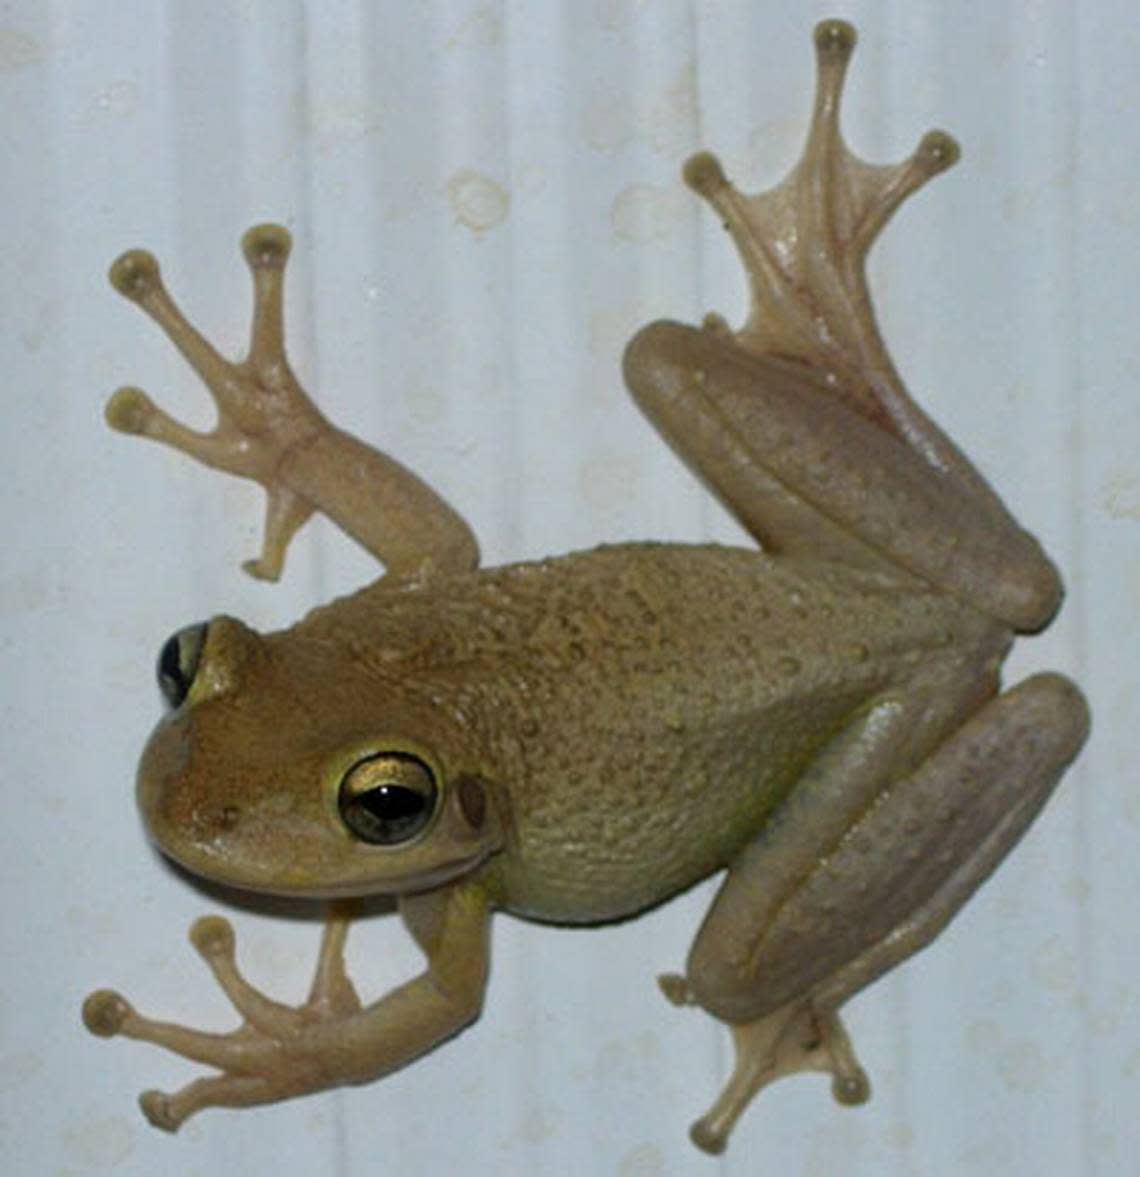 Cuban tree frogs are native to Cuba, the Cayman Island and the Bahamas. They made their way to Florida in the 1920s, likely on cargo ships, according to the University of Florida. They secrete toxins than can cause skin irritation in people and they are threats to native wildlife, eating different types of American frogs.